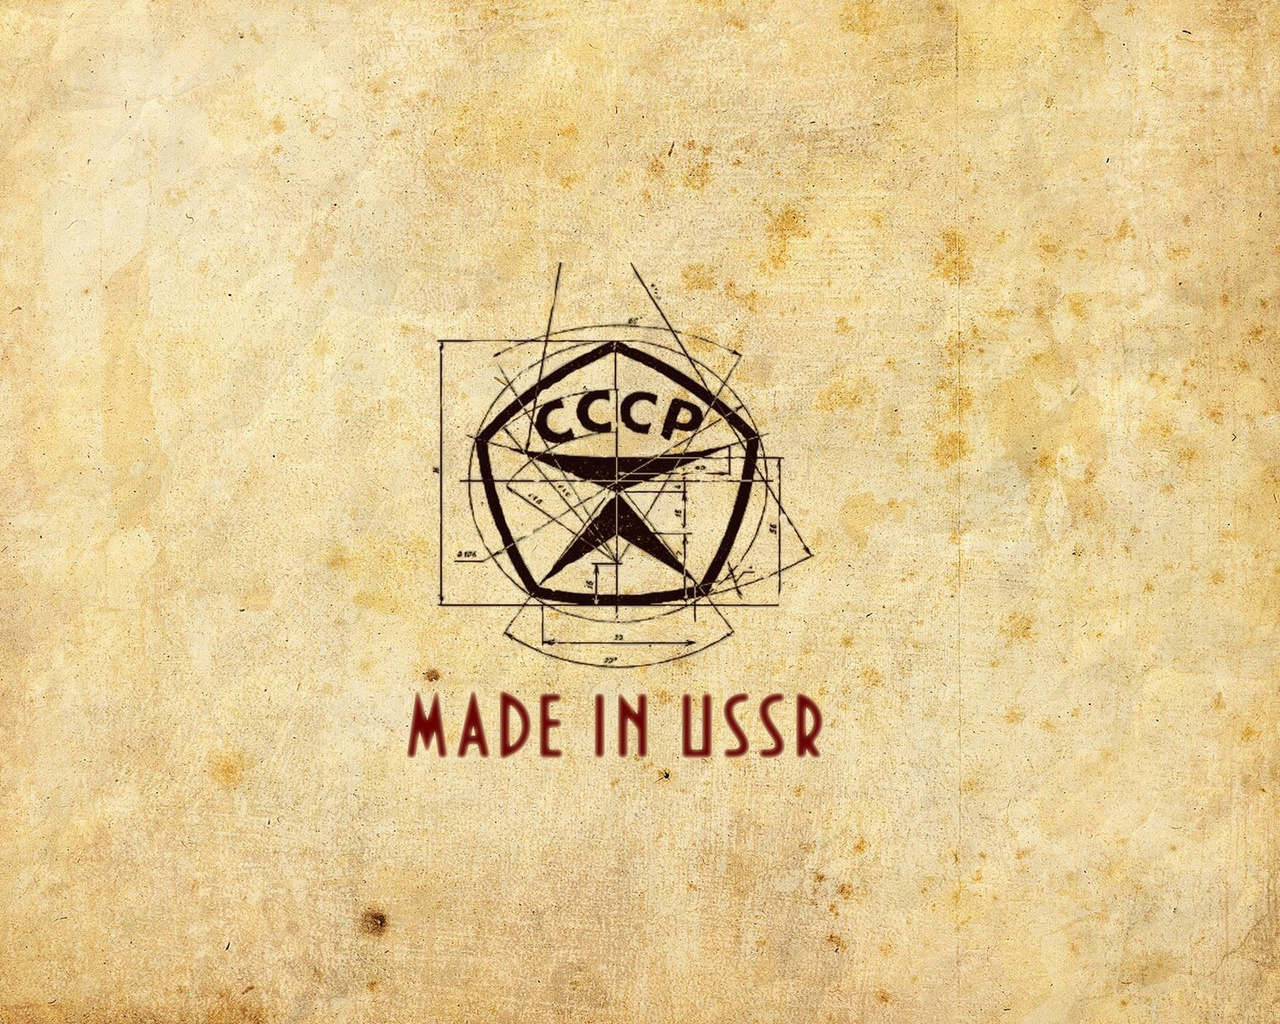 Made in ussr,   , 